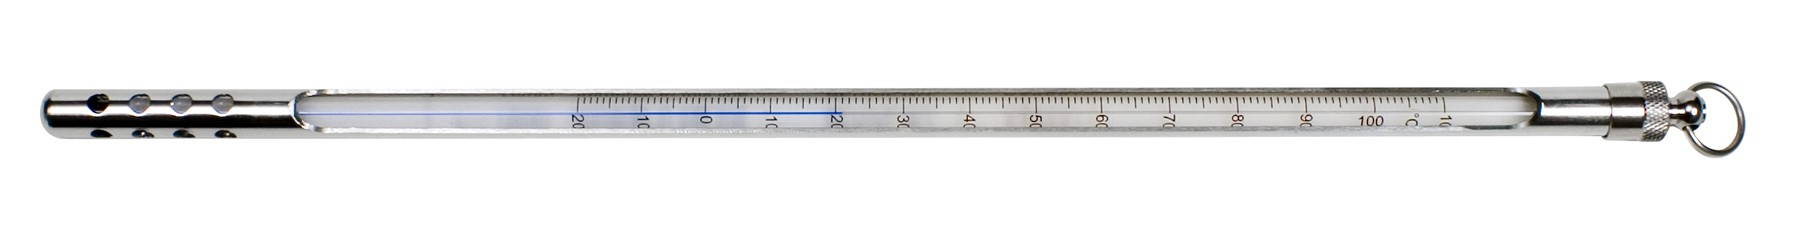 H-B DURAC Plus Armored Liquid-In-Glass Thermometer; -20 to 110C, 76mm Immersion, Organic Liquid Fill